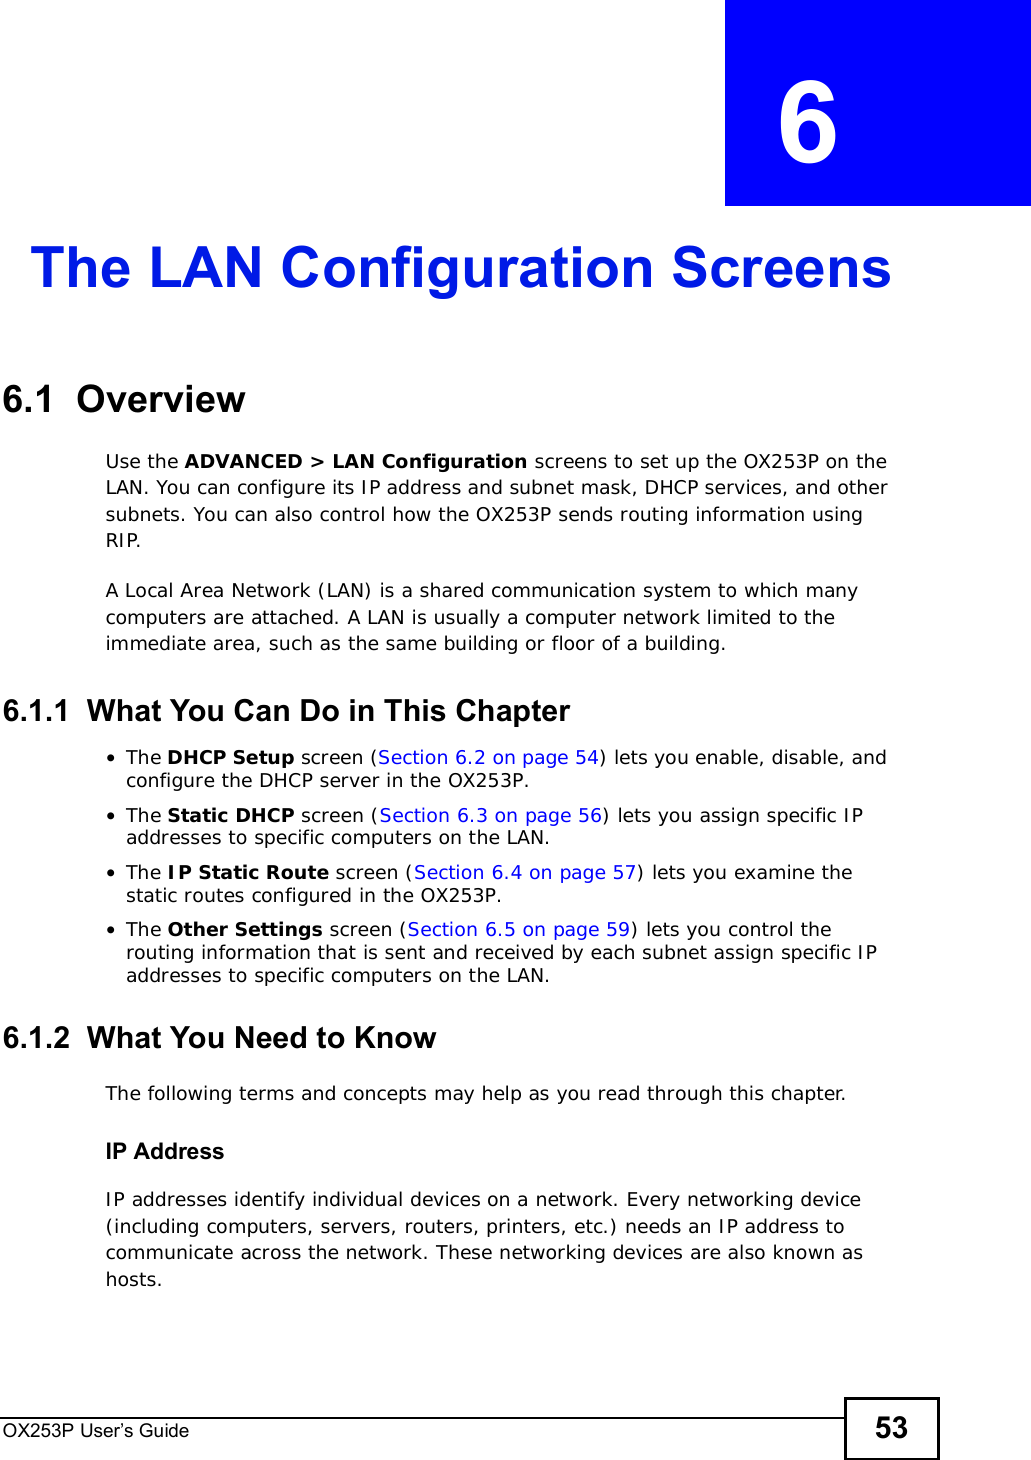 OX253P User’s Guide 53CHAPTER  6 The LAN Configuration Screens6.1  OverviewUse the ADVANCED &gt; LAN Configuration screens to set up the OX253P on the LAN. You can configure its IP address and subnet mask, DHCP services, and other subnets. You can also control how the OX253P sends routing information using RIP.A Local Area Network (LAN) is a shared communication system to which many computers are attached. A LAN is usually a computer network limited to the immediate area, such as the same building or floor of a building.6.1.1  What You Can Do in This Chapter•The DHCP Setup screen (Section 6.2 on page 54) lets you enable, disable, and configure the DHCP server in the OX253P.•The Static DHCP screen (Section 6.3 on page 56) lets you assign specific IP addresses to specific computers on the LAN.•The IP Static Route screen (Section 6.4 on page 57) lets you examine the static routes configured in the OX253P.•The Other Settings screen (Section 6.5 on page 59) lets you control the routing information that is sent and received by each subnet assign specific IP addresses to specific computers on the LAN.6.1.2  What You Need to KnowThe following terms and concepts may help as you read through this chapter.IP AddressIP addresses identify individual devices on a network. Every networking device (including computers, servers, routers, printers, etc.) needs an IP address to communicate across the network. These networking devices are also known as hosts.